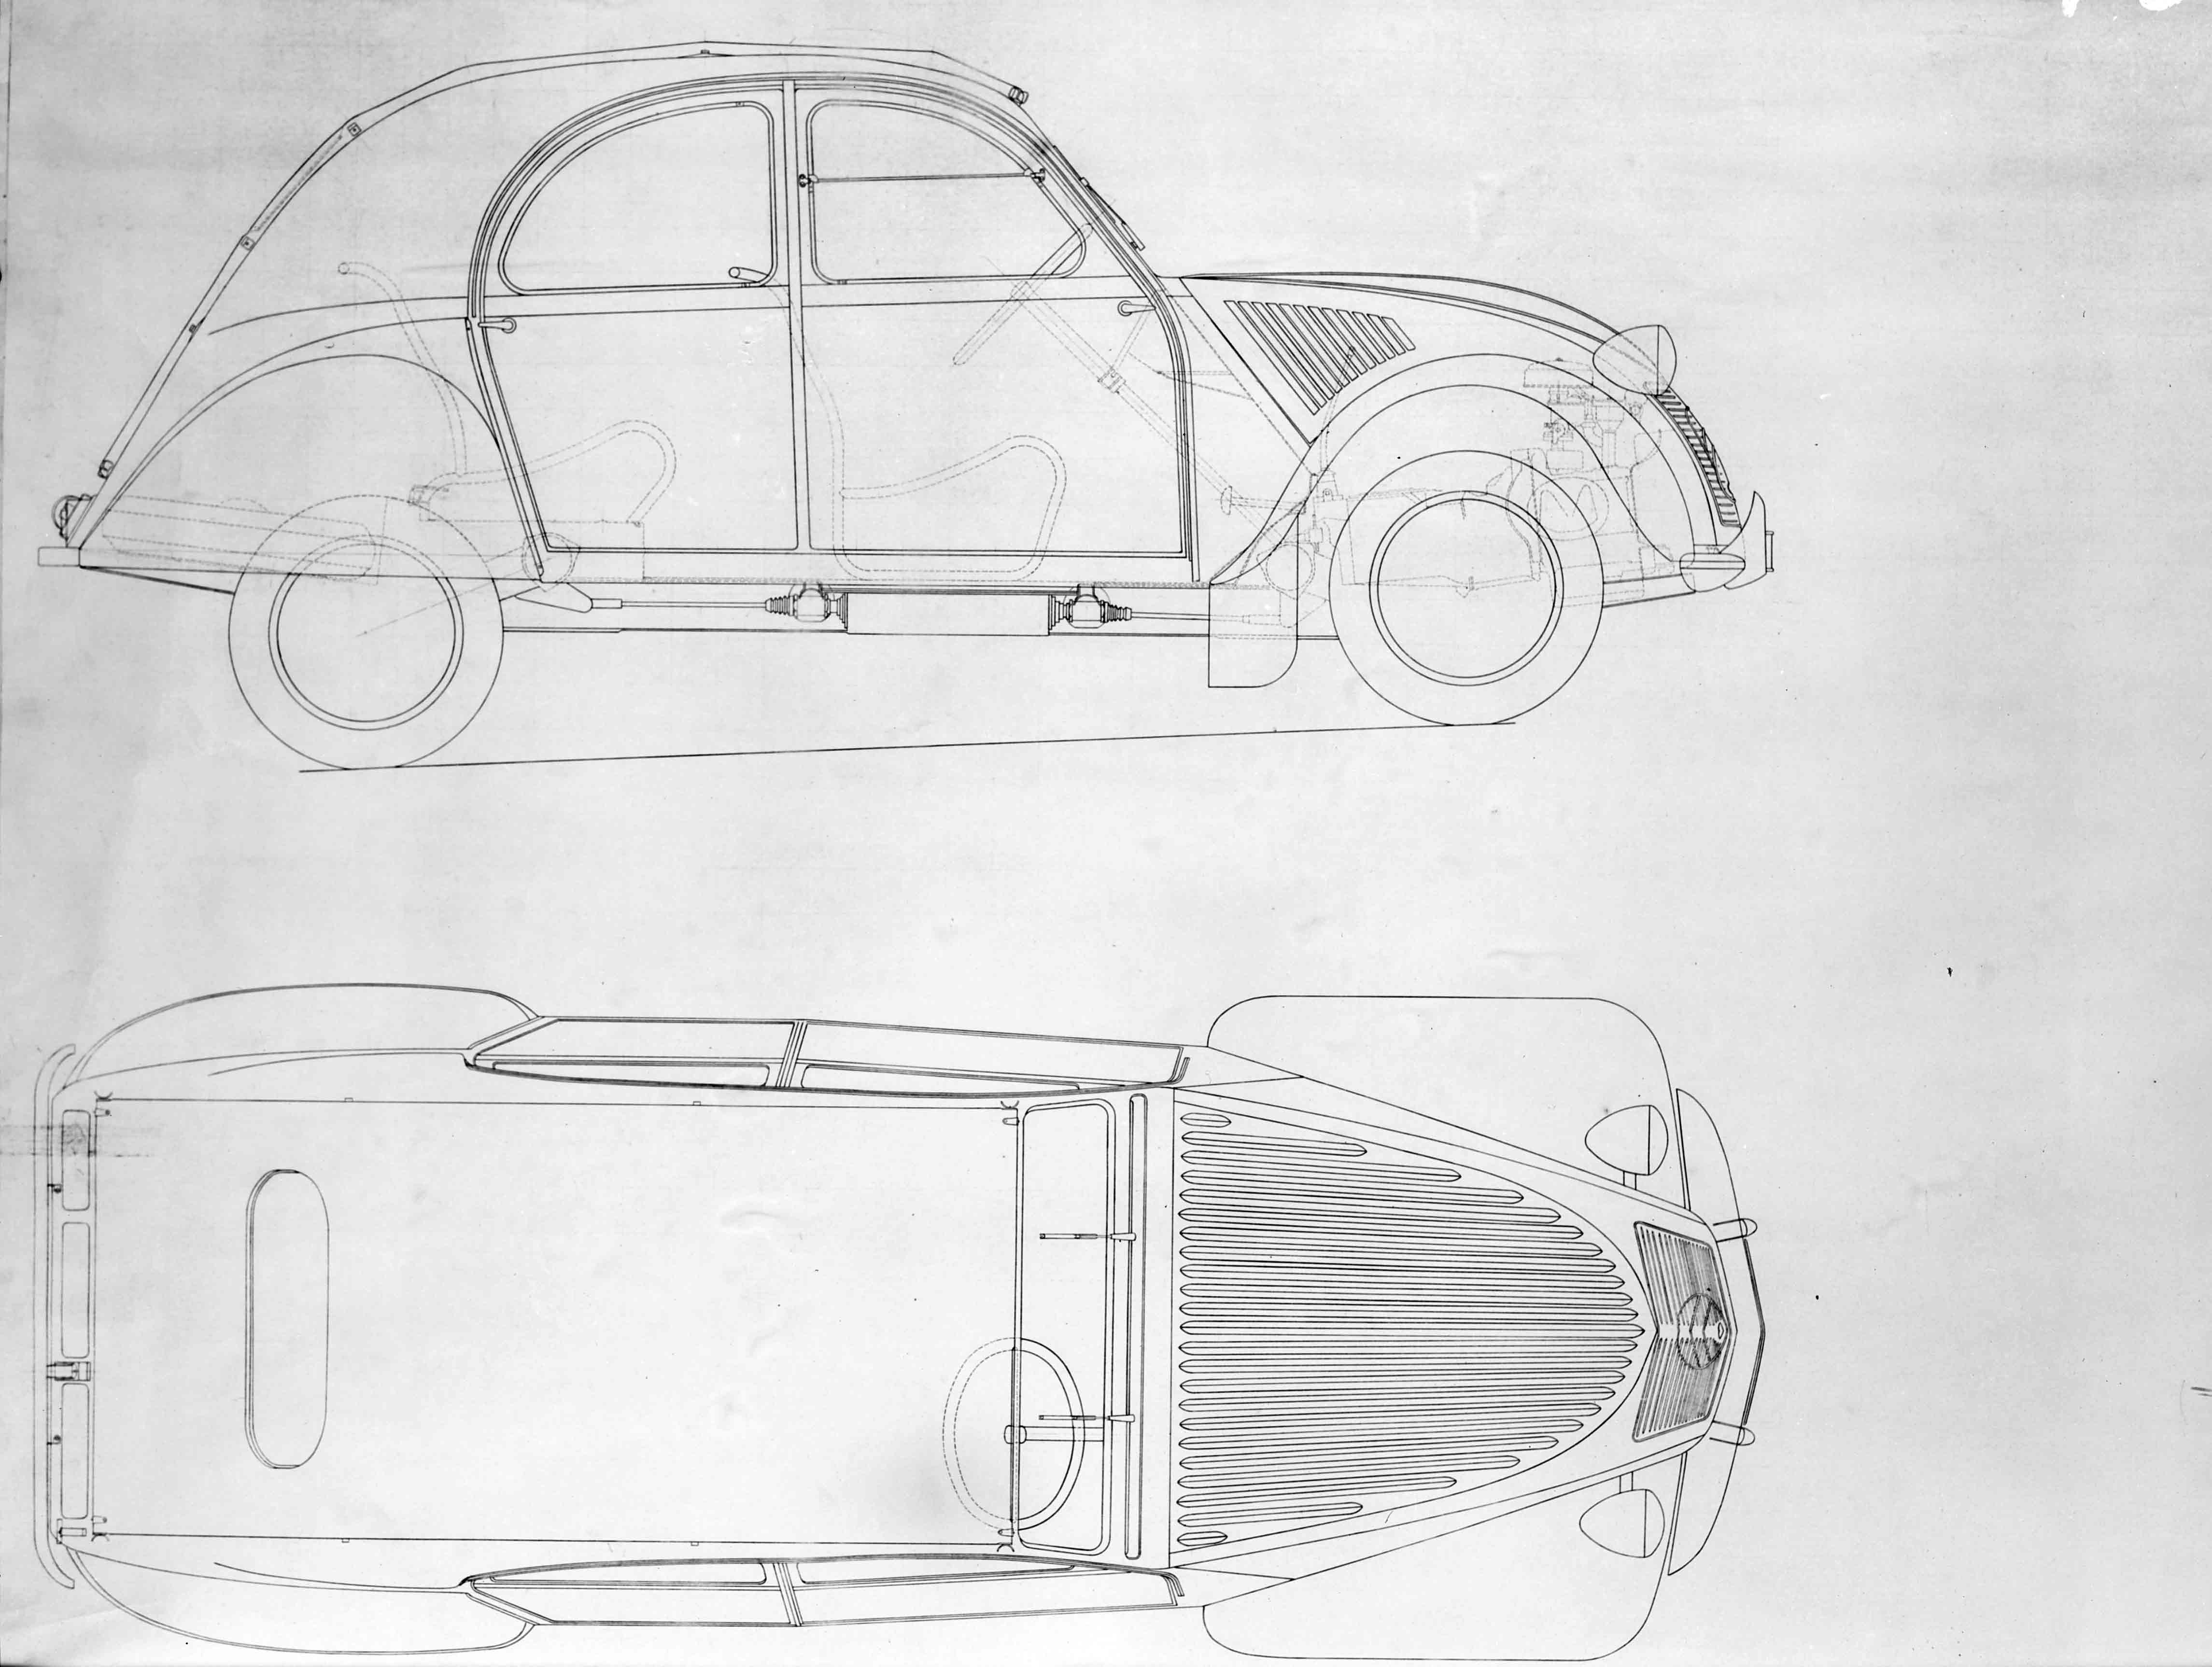 Line drawings of the 2CV